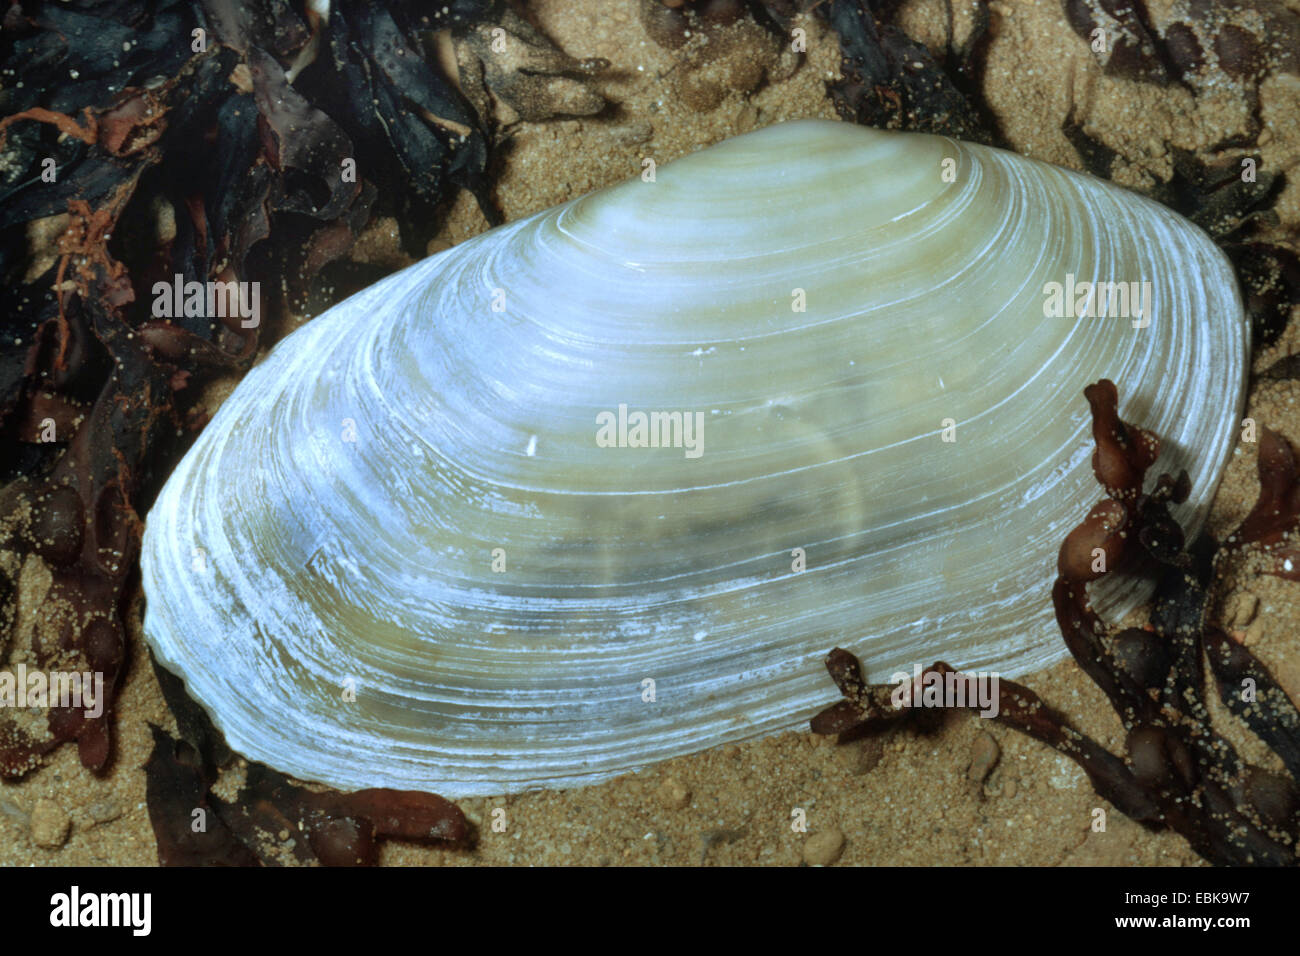 common otter clam (Lutraria lutraria), shell among algae in the sand Stock Photo